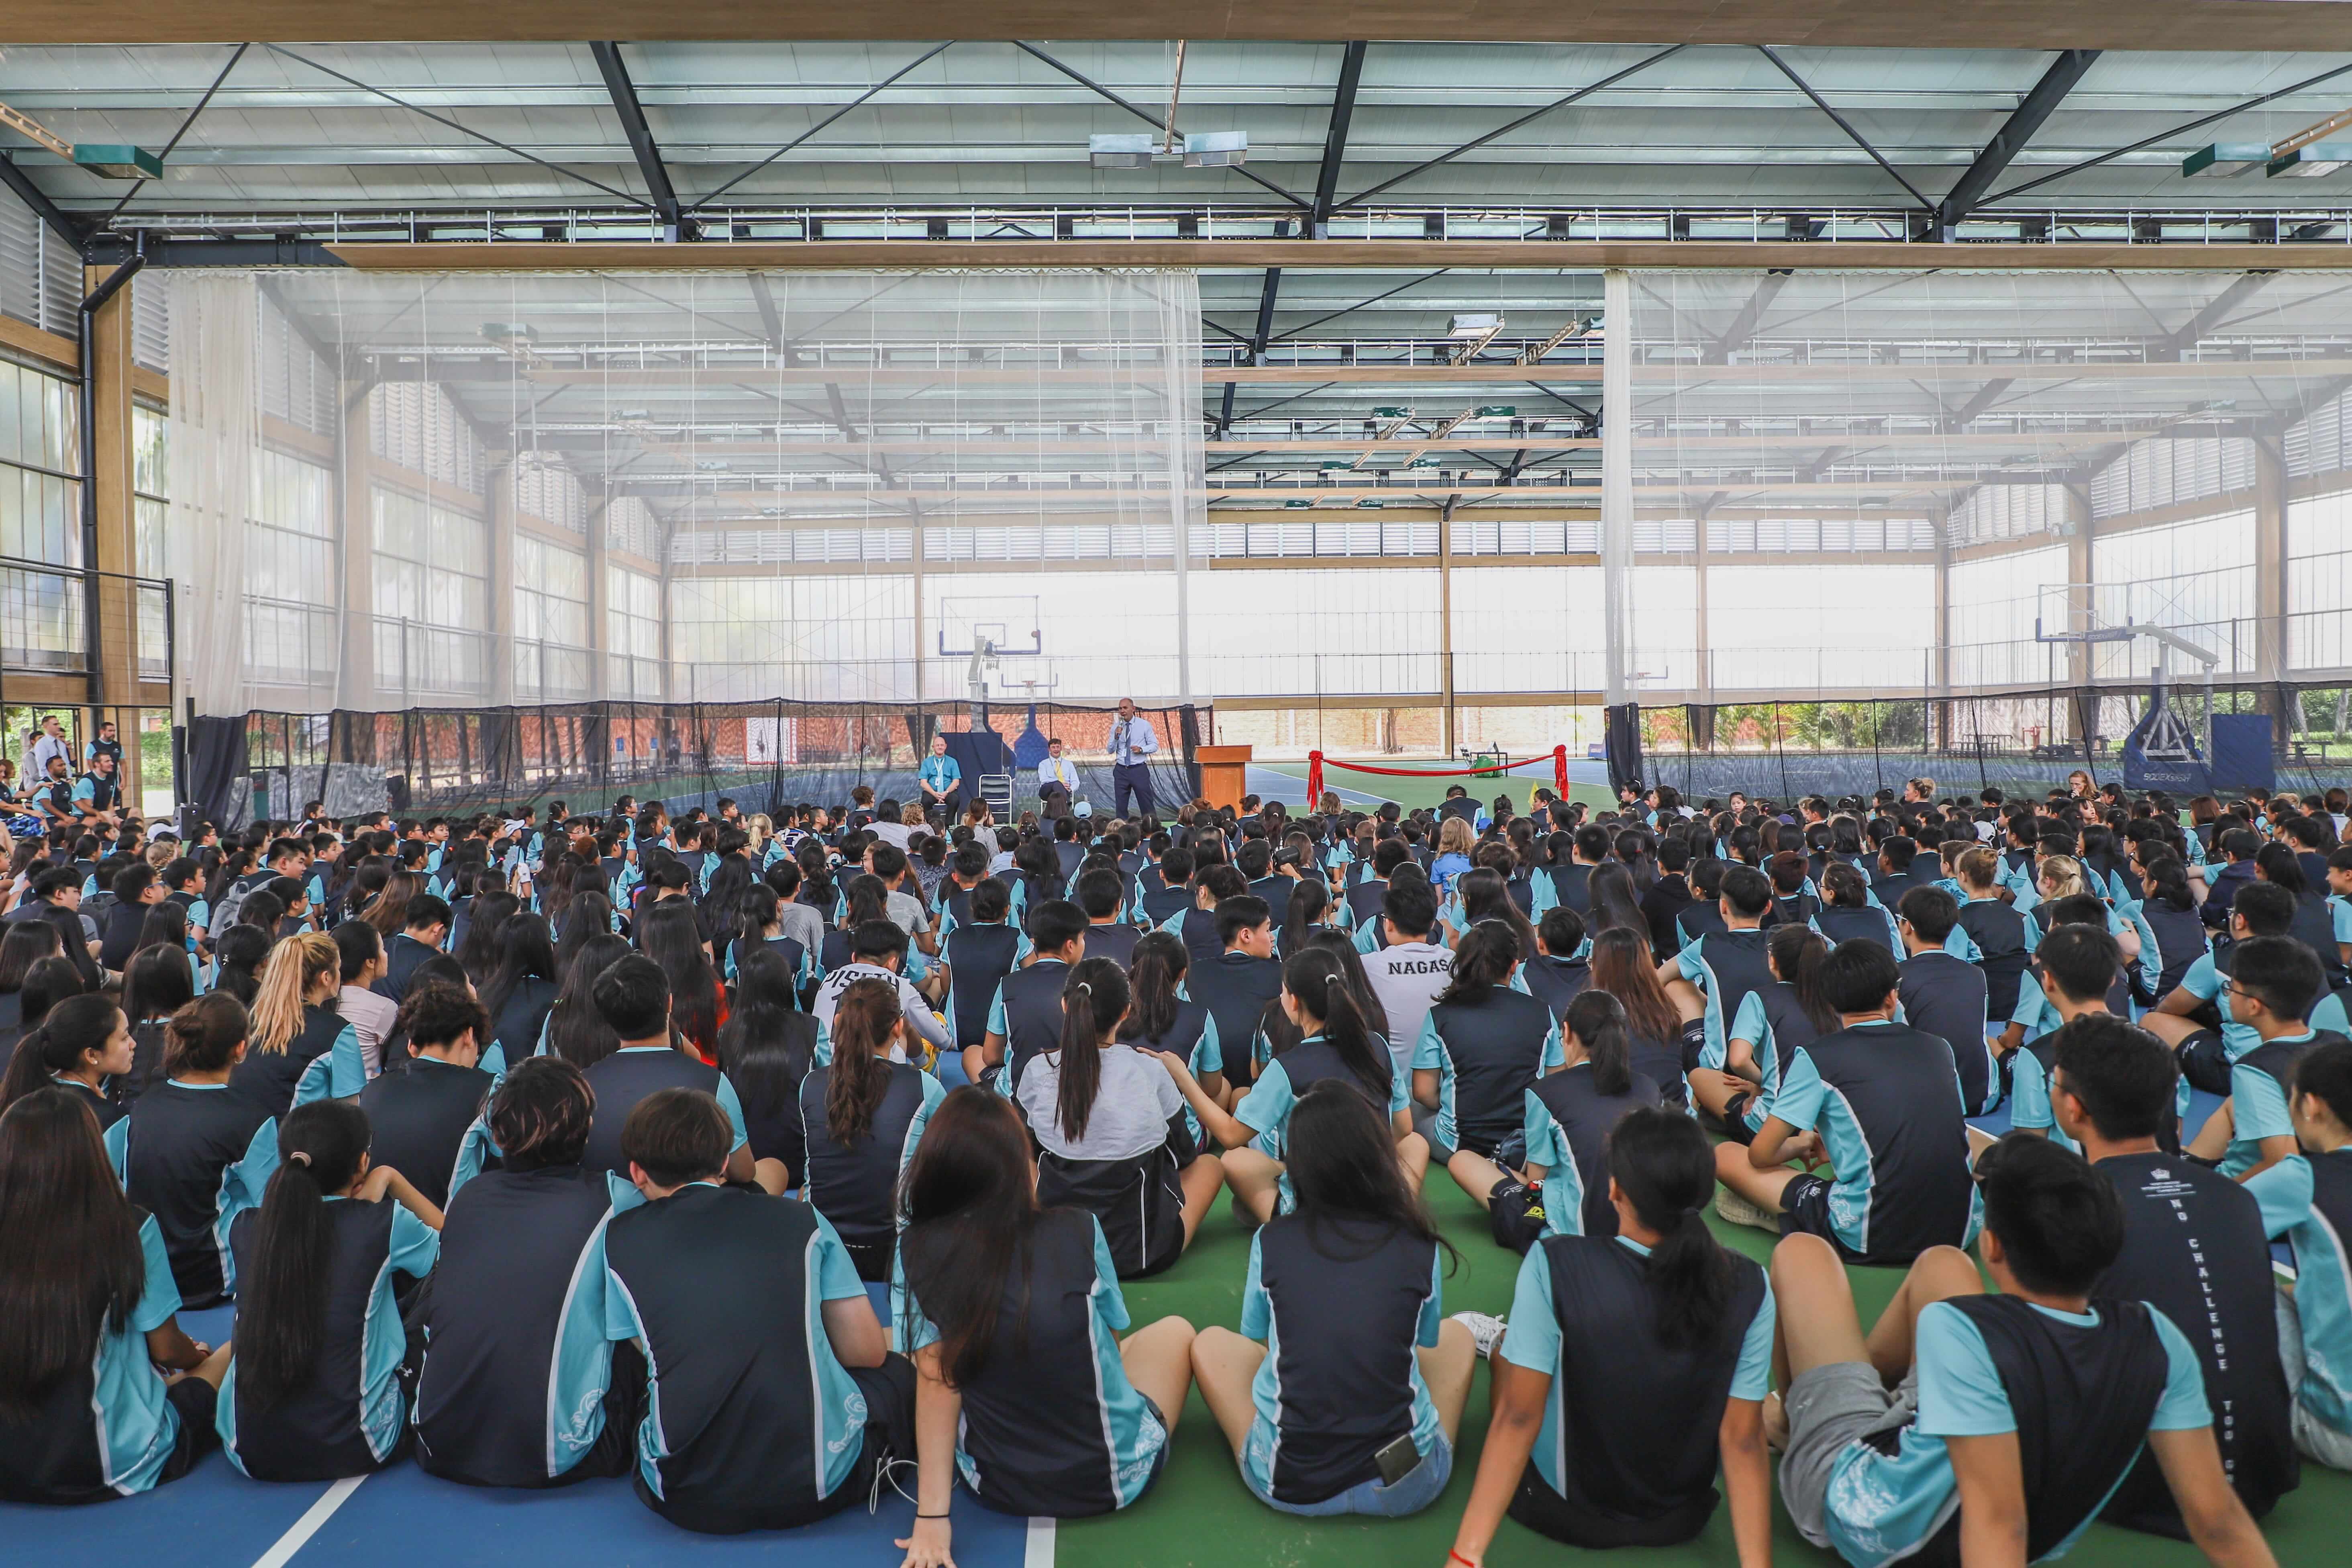 New Northbridge Sports Hall opened by Nord Anglia CEO-new-northbridge-sports-hall-opened-by-nord-anglia-ceo-NISCOrientation 1008201868 1